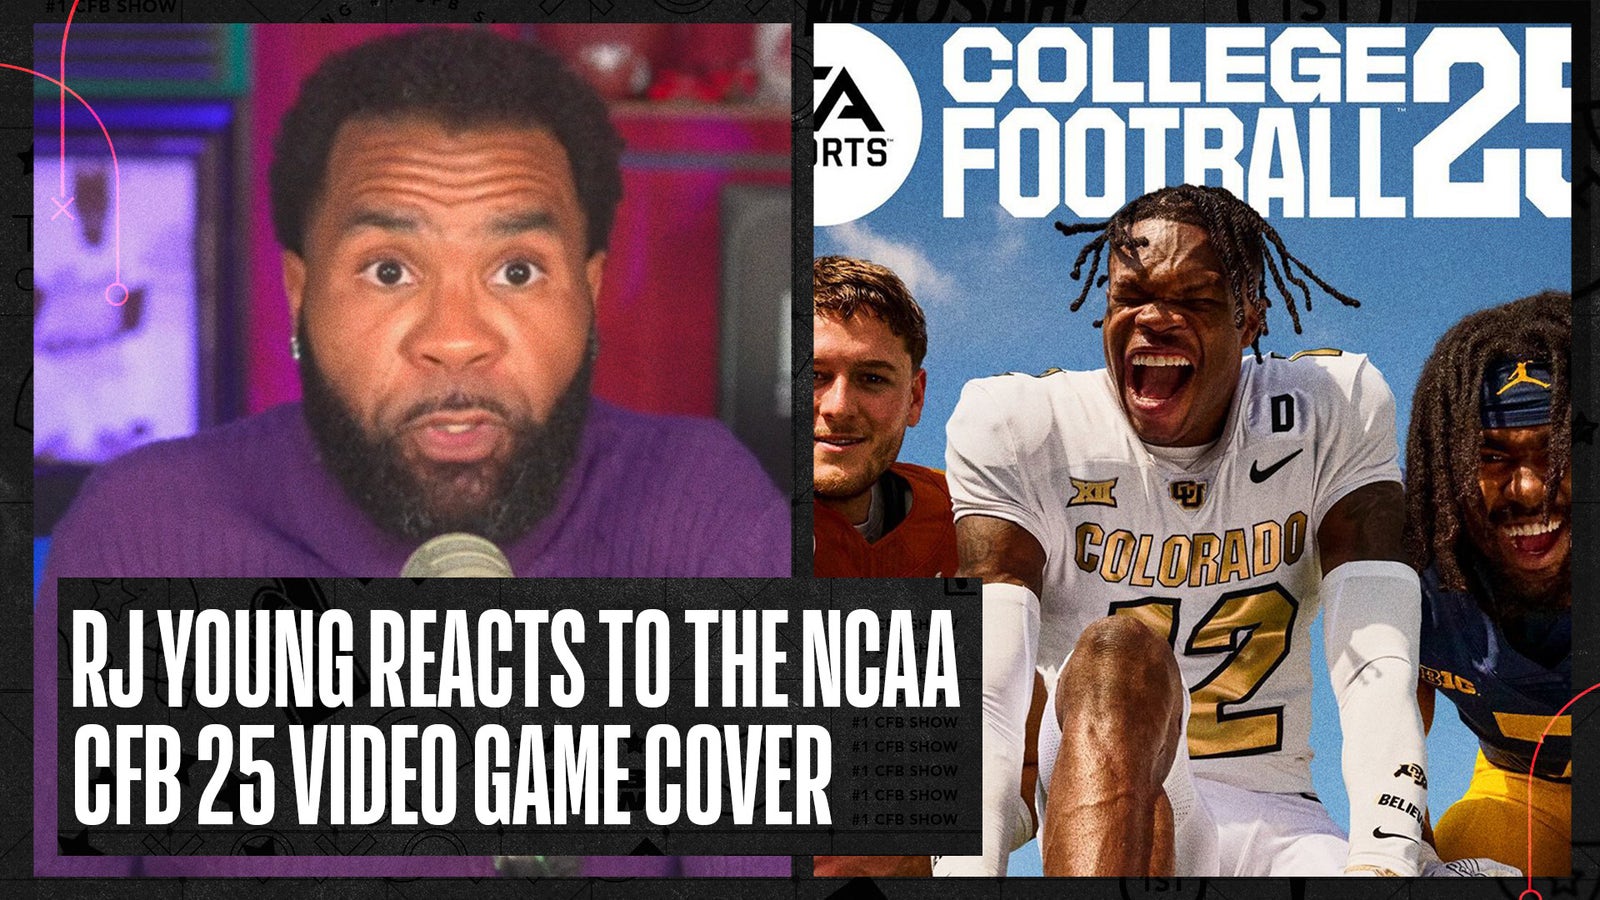 RJ Young reacts to the NCAA College Football 25 video game cover